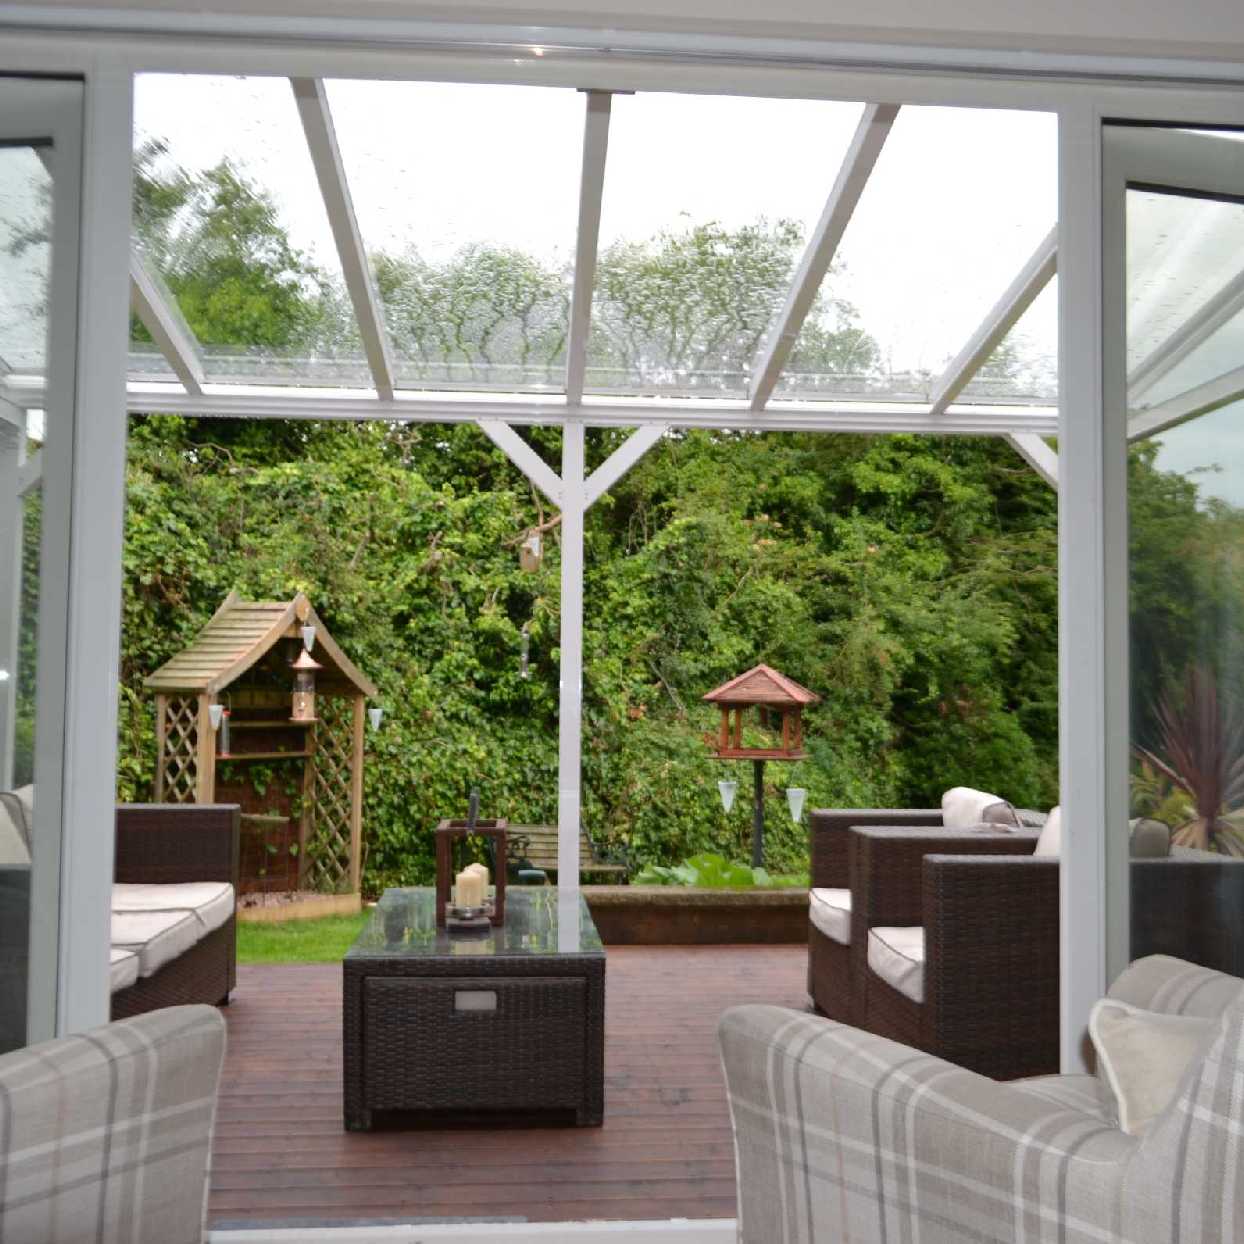 Great selection of Omega Smart Lean-To Canopy, White UNGLAZED for 6mm Glazing - 7.0m (W) x 2.0m (P), (4) Supporting Posts